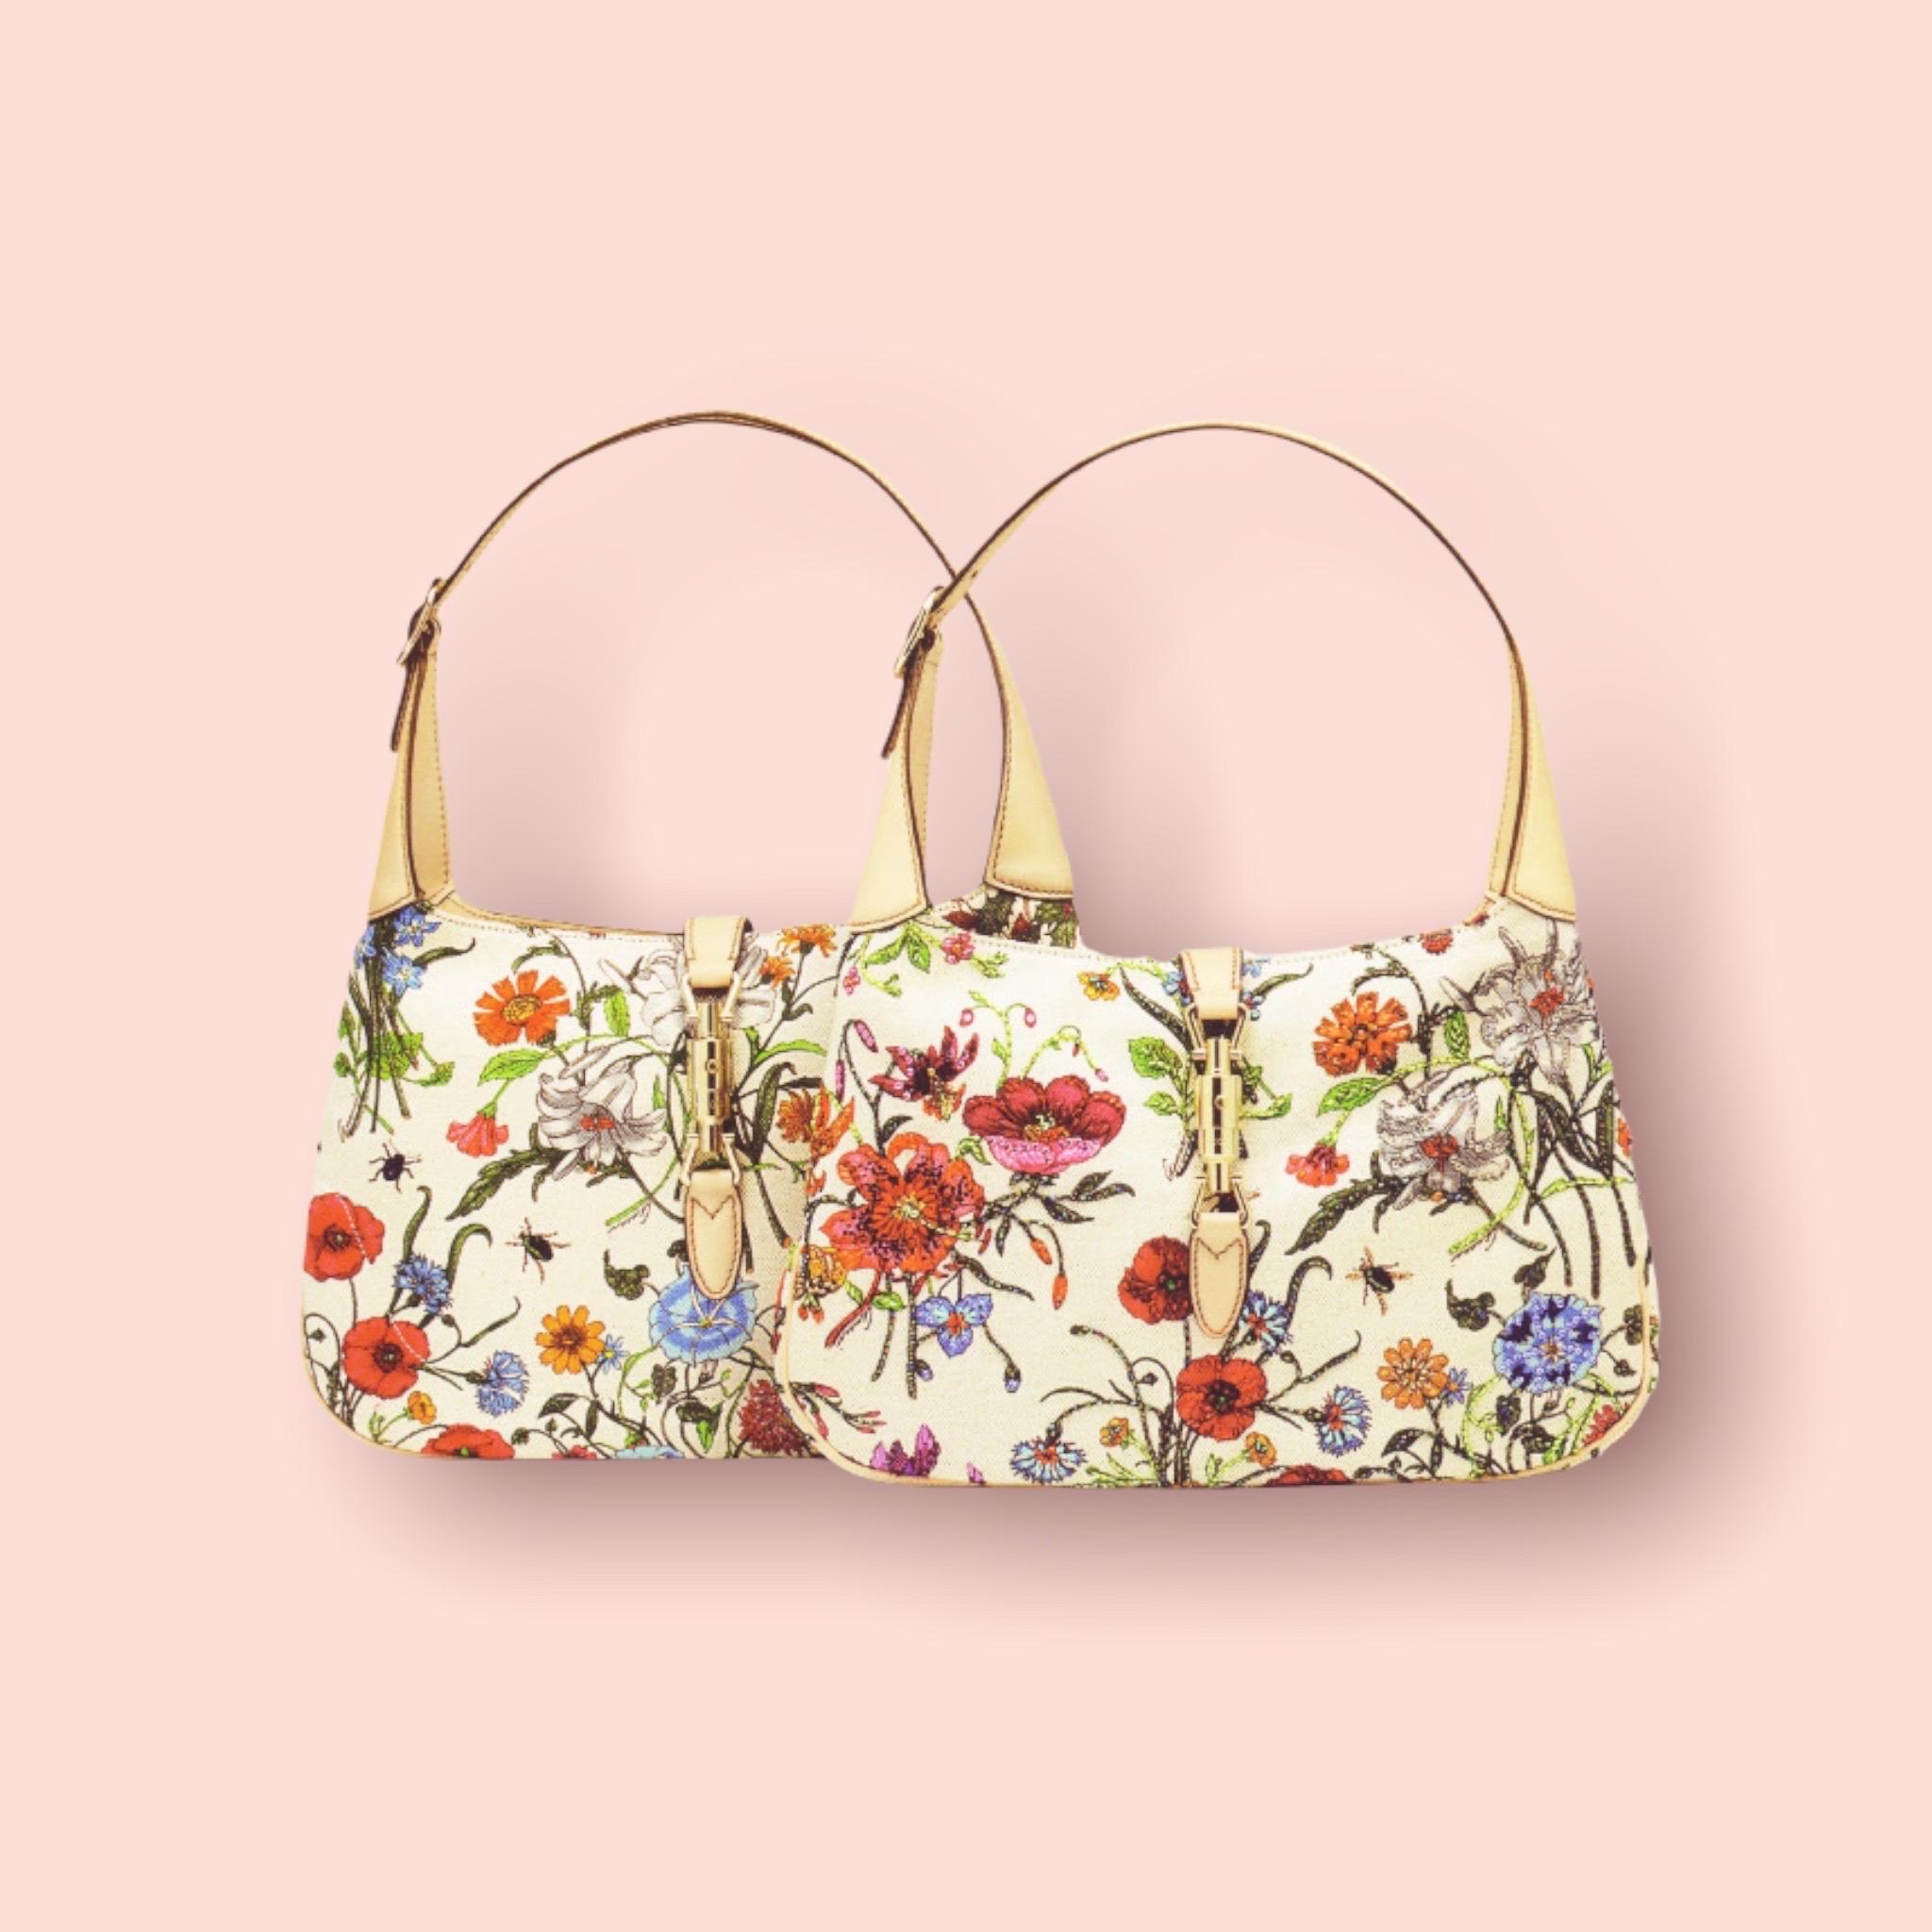 GUCCI Limited Edition Jackie Flora Print Embroidered Shoulder Bag - Museum Piece For Sale 4